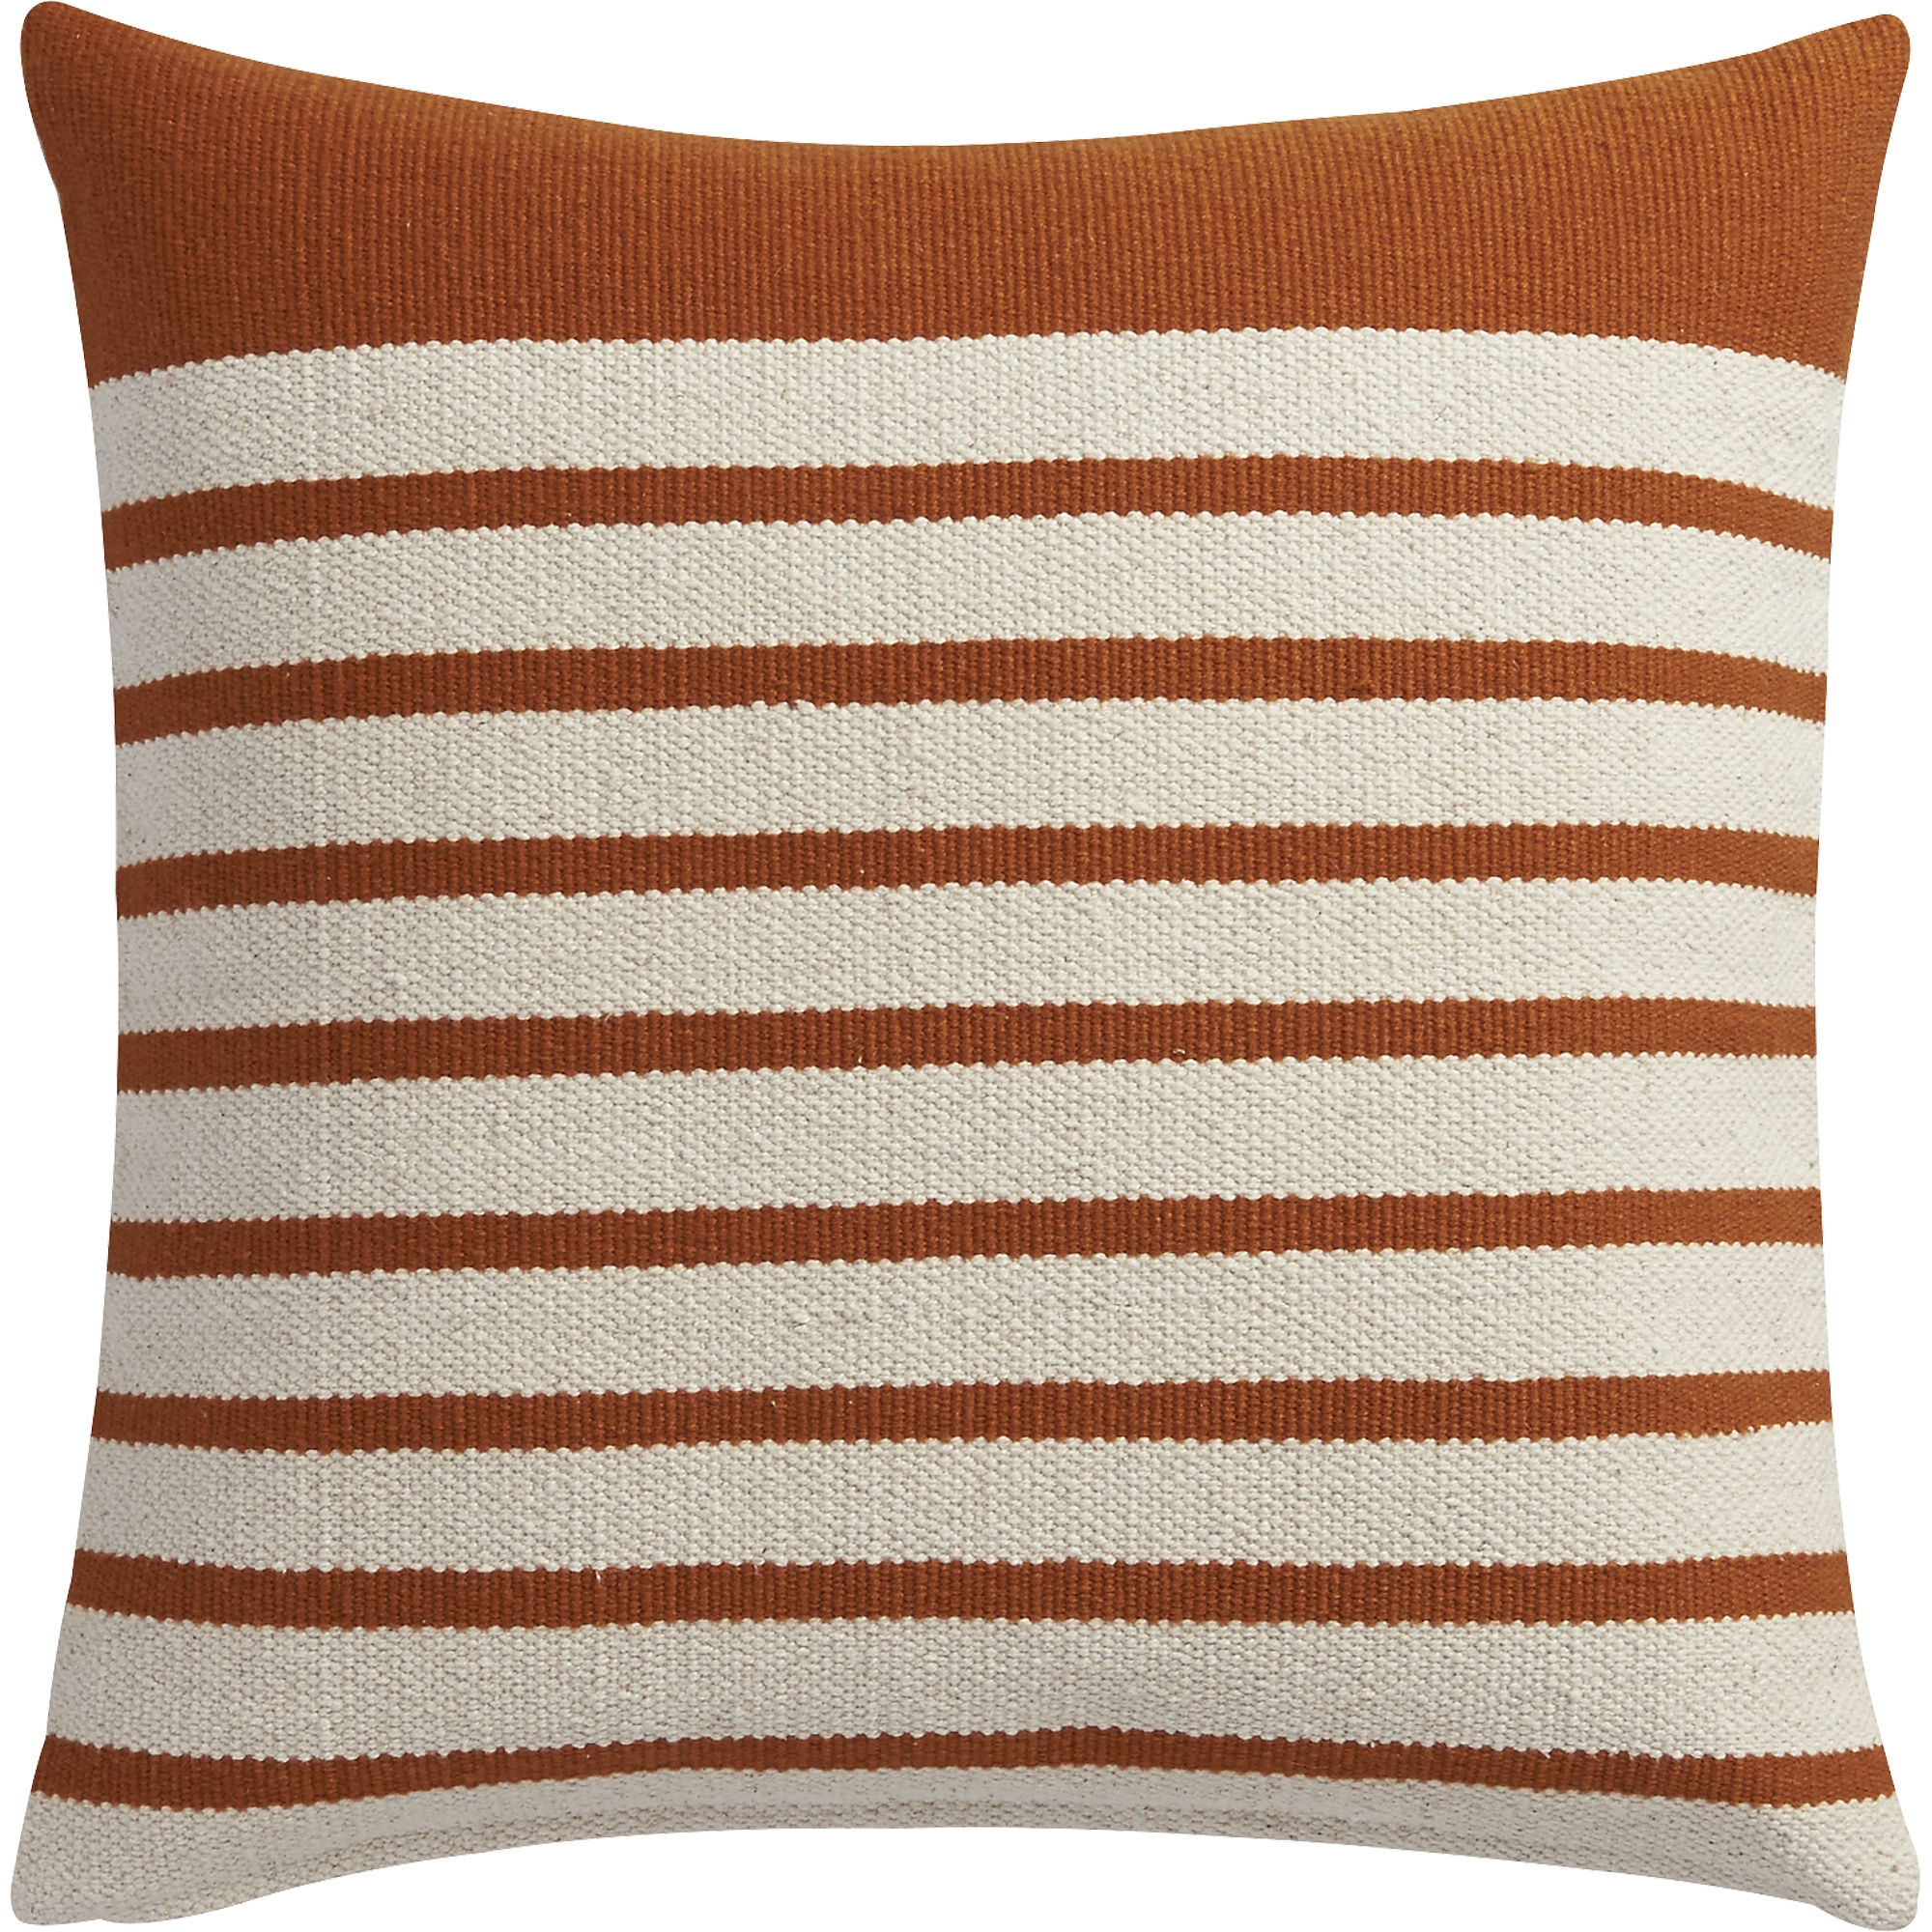 Division rust pillow - 20x20 - With Insert - Image 0